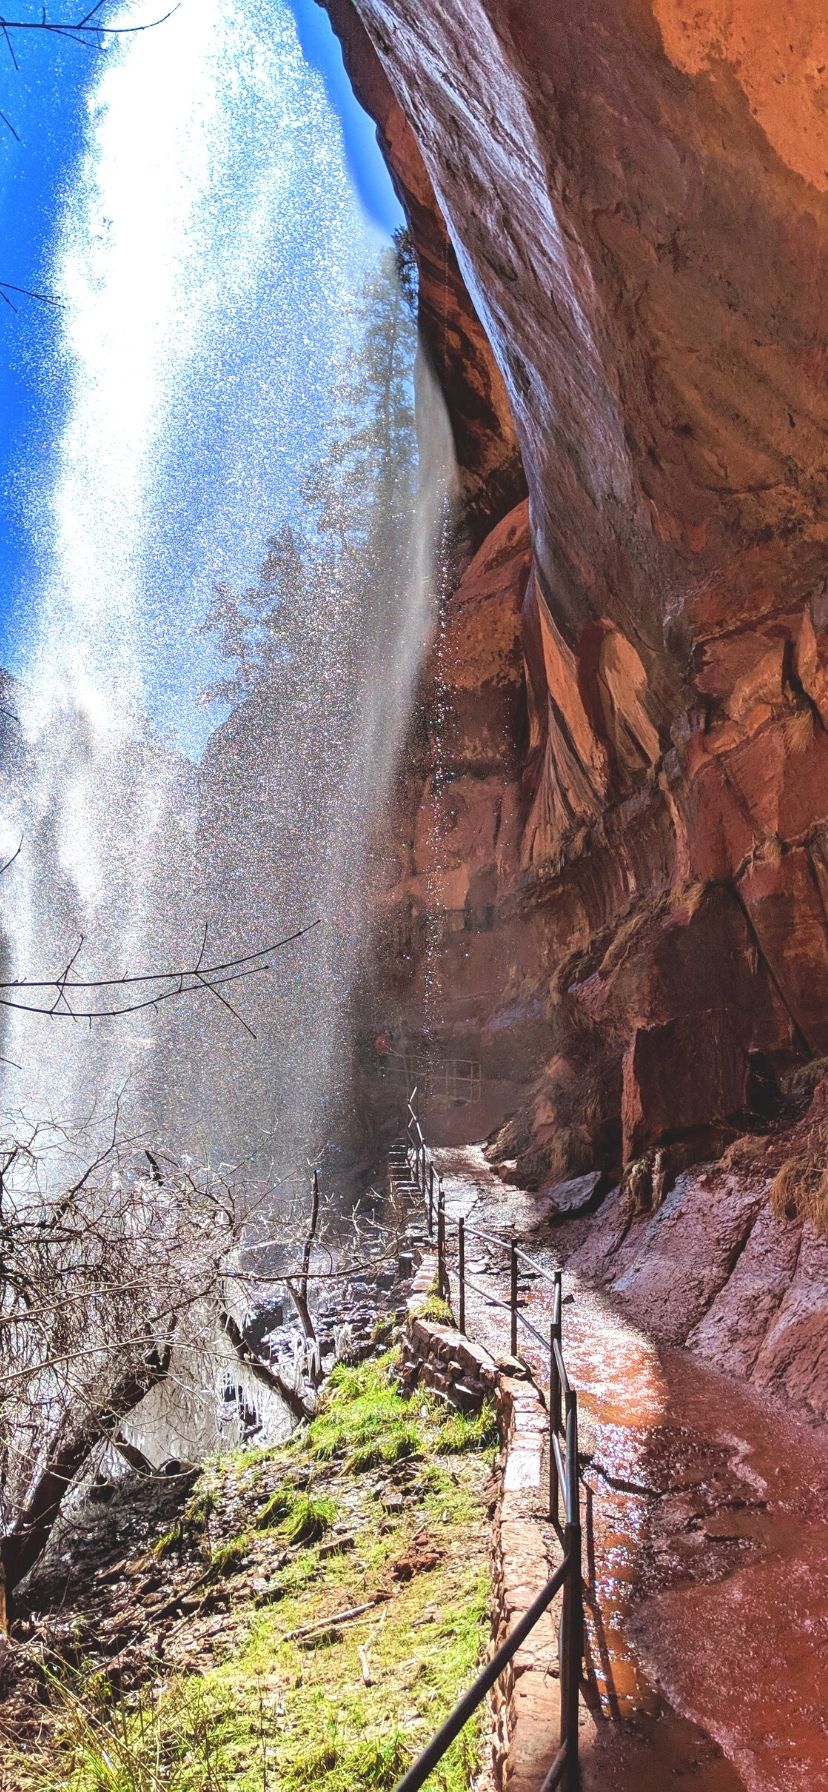 Best hikes in Zion National Park include difficult and kid-friendly hiking. The Narrows, Zion Overlook, Emerald Pools and hiking in Kolob Canyons are just a few. These are the top hikes in Zion NP, UT